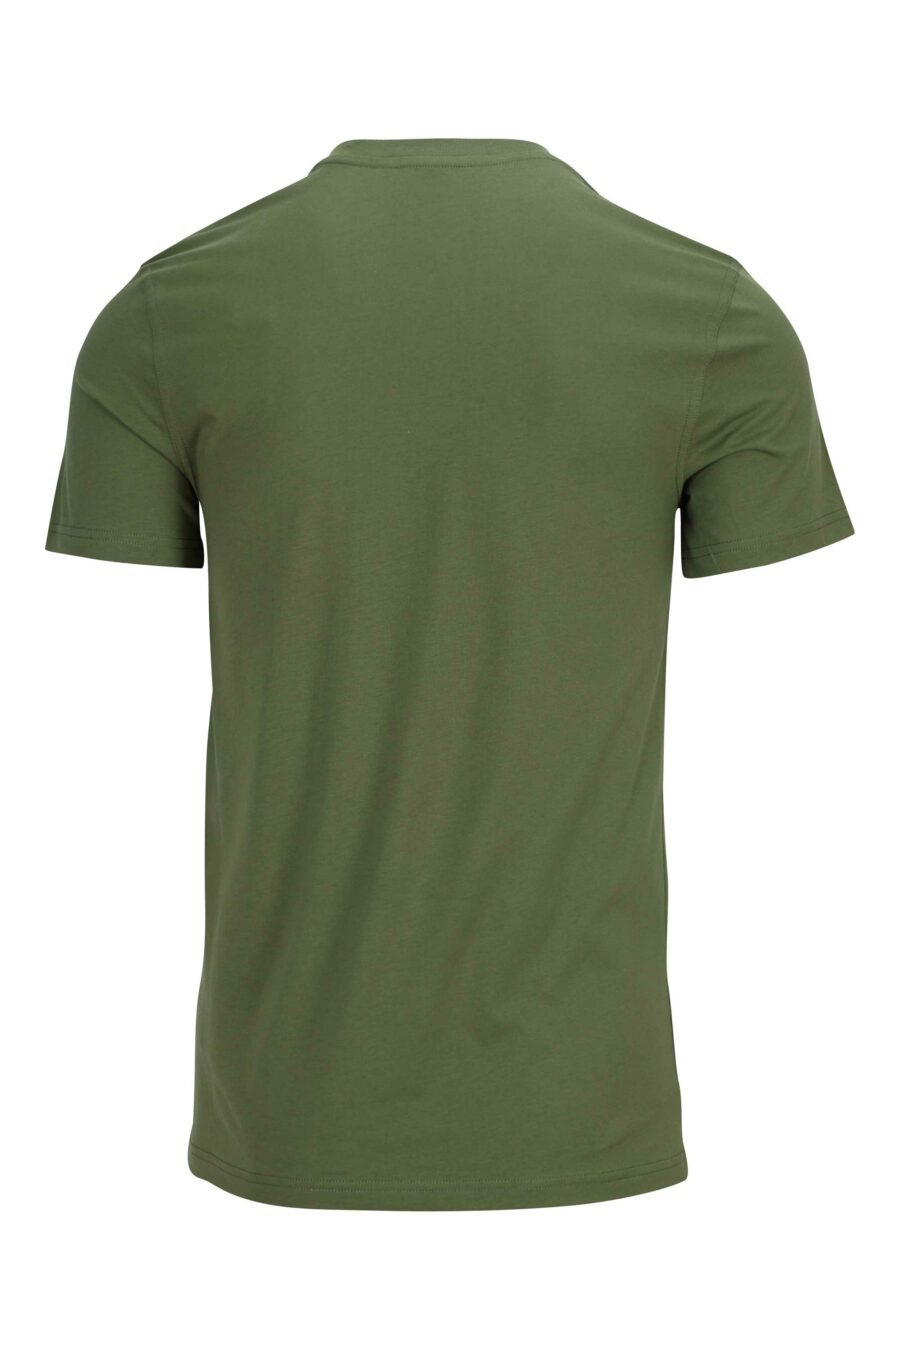 Military green T-shirt in organic cotton with "teddy" maxilogo - 889316854527 1